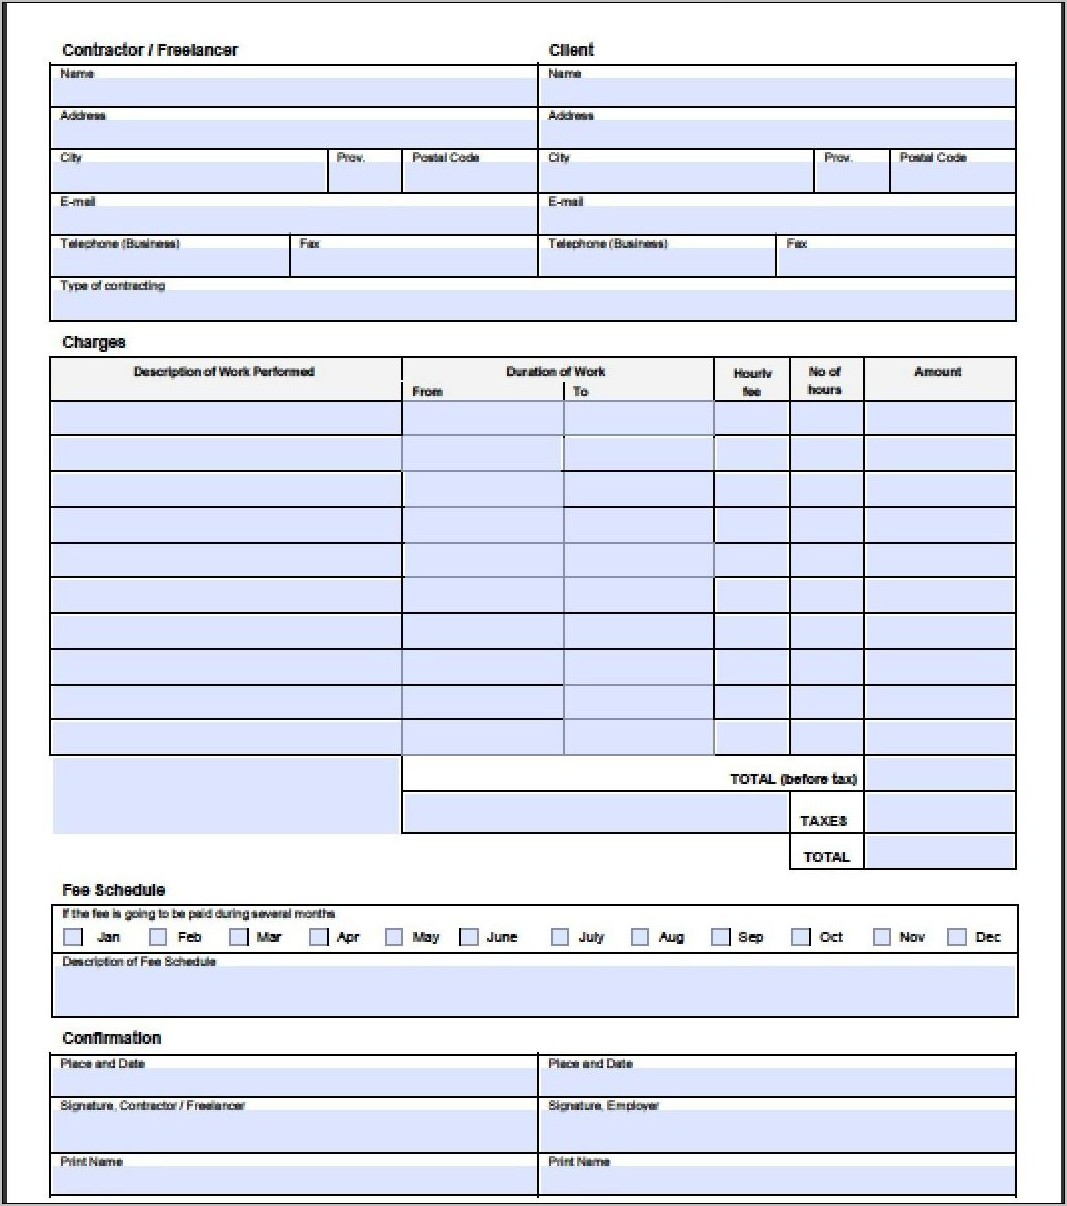 Sample Invoice Electrical Contractor